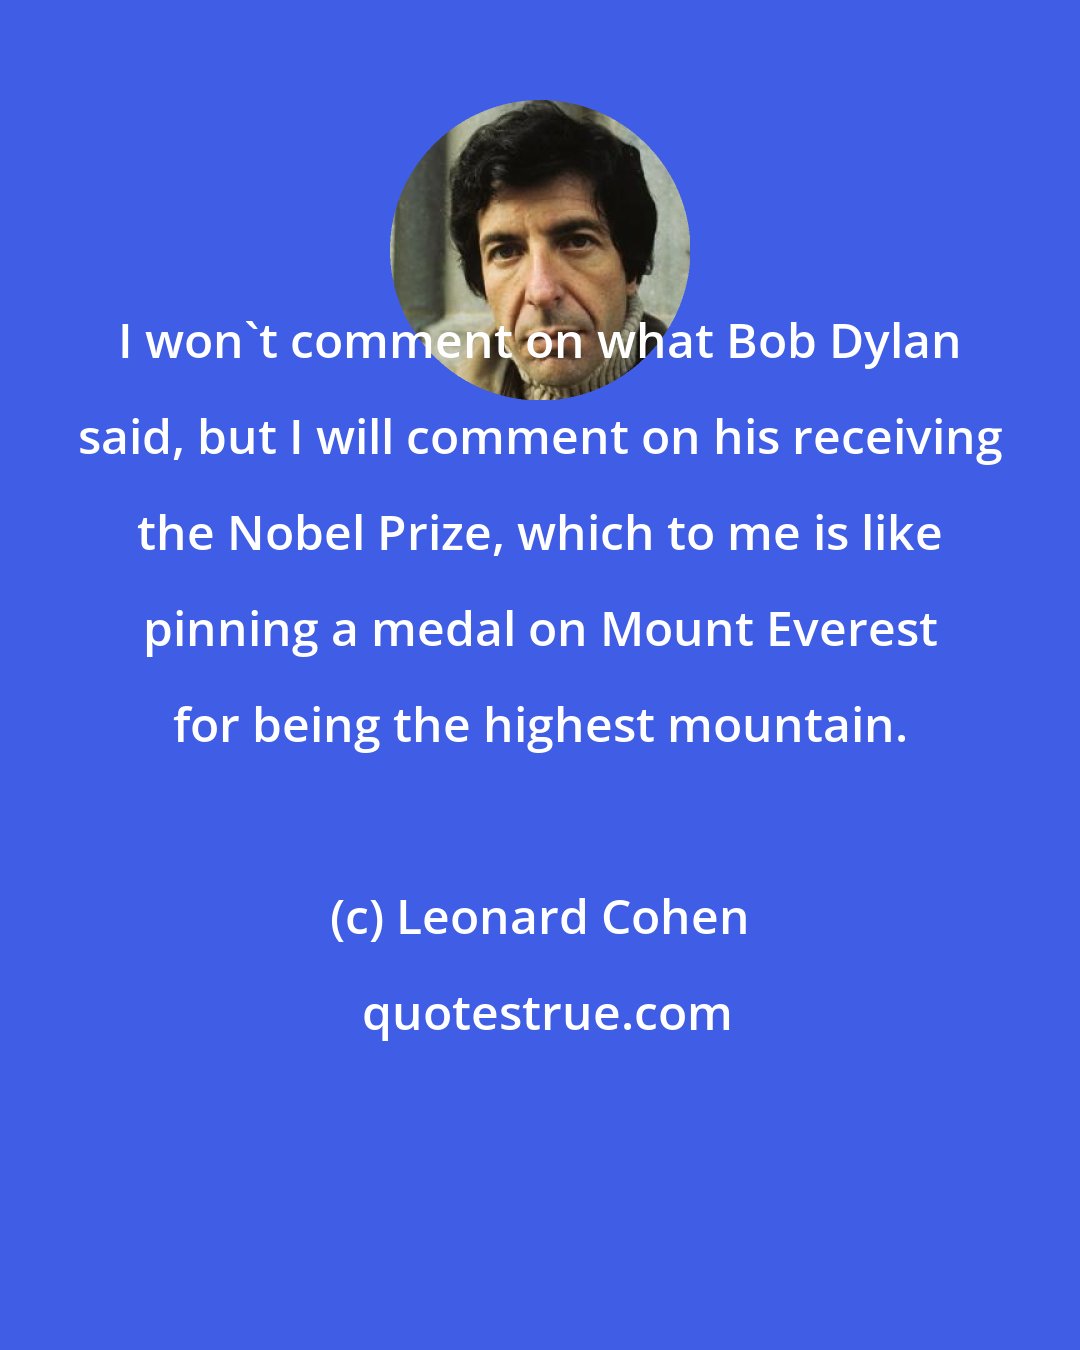 Leonard Cohen: I won't comment on what Bob Dylan said, but I will comment on his receiving the Nobel Prize, which to me is like pinning a medal on Mount Everest for being the highest mountain.